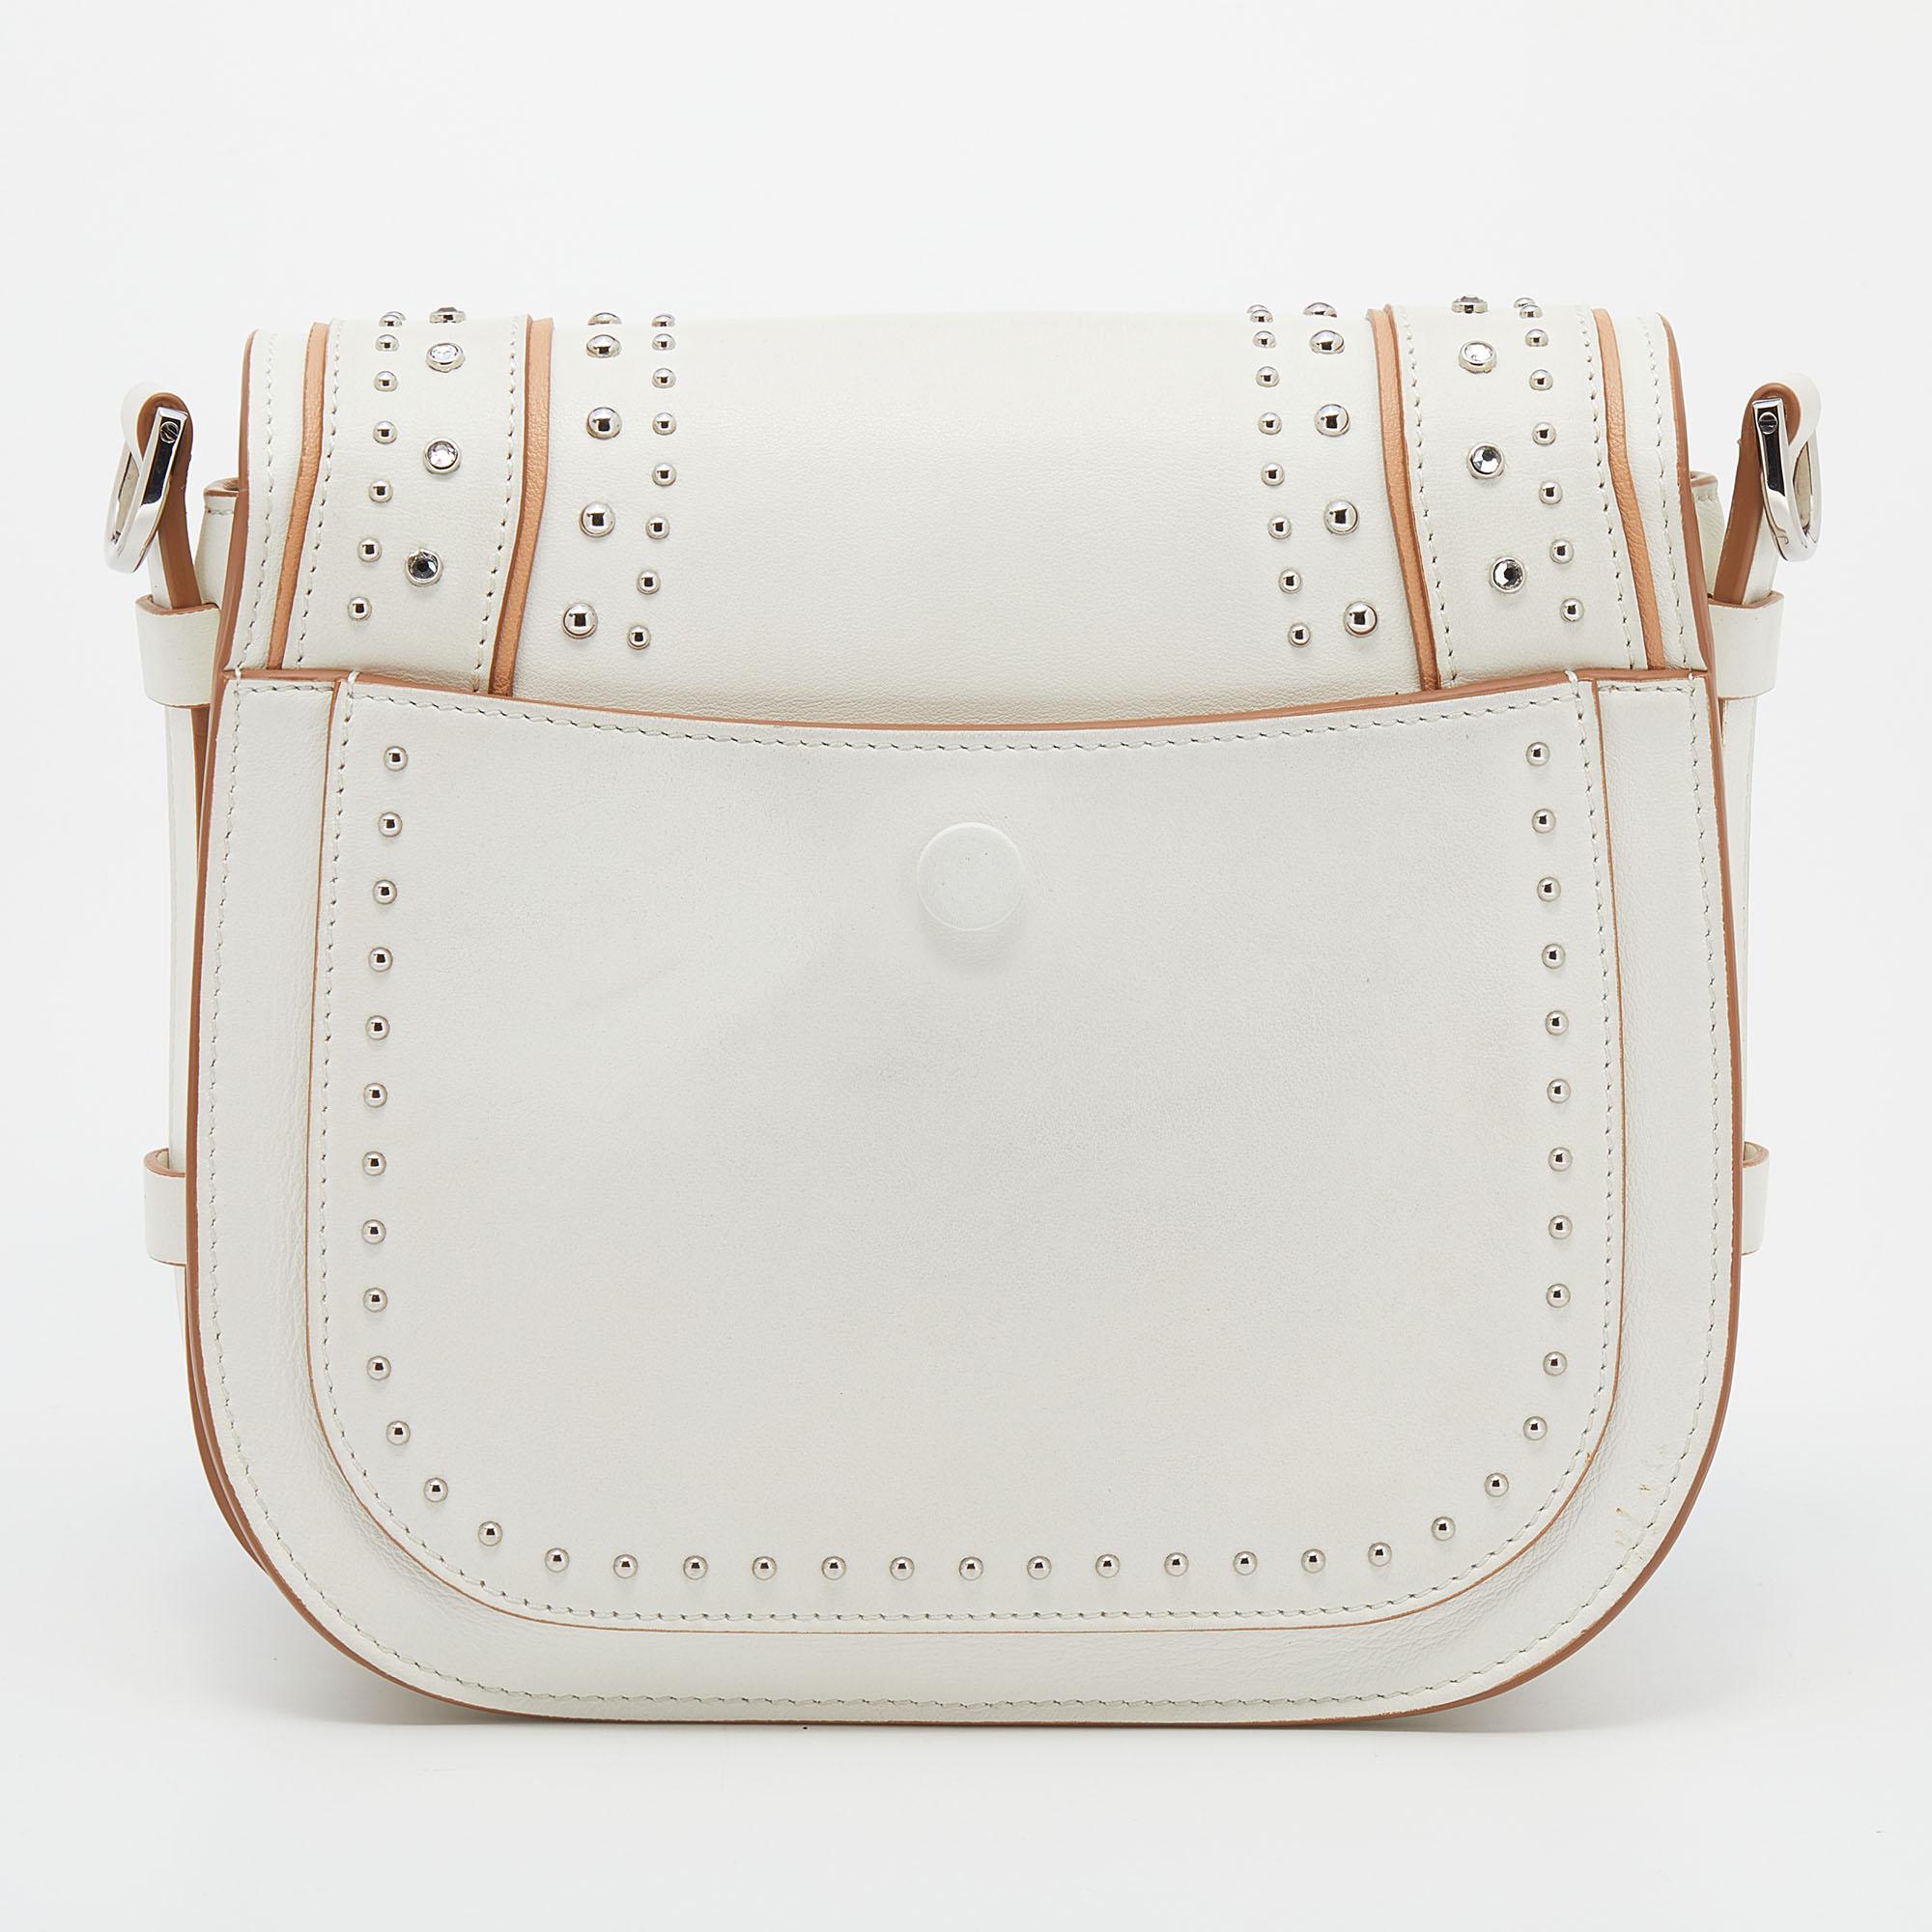 This T Saddle bag from the House of Tod's is both elegant and fashionable. Crafted from white leather, this bag features a shoulder strap, silver-tone hardware, and an Alcantara-lined interior. A logo accent is placed on the front. Make this